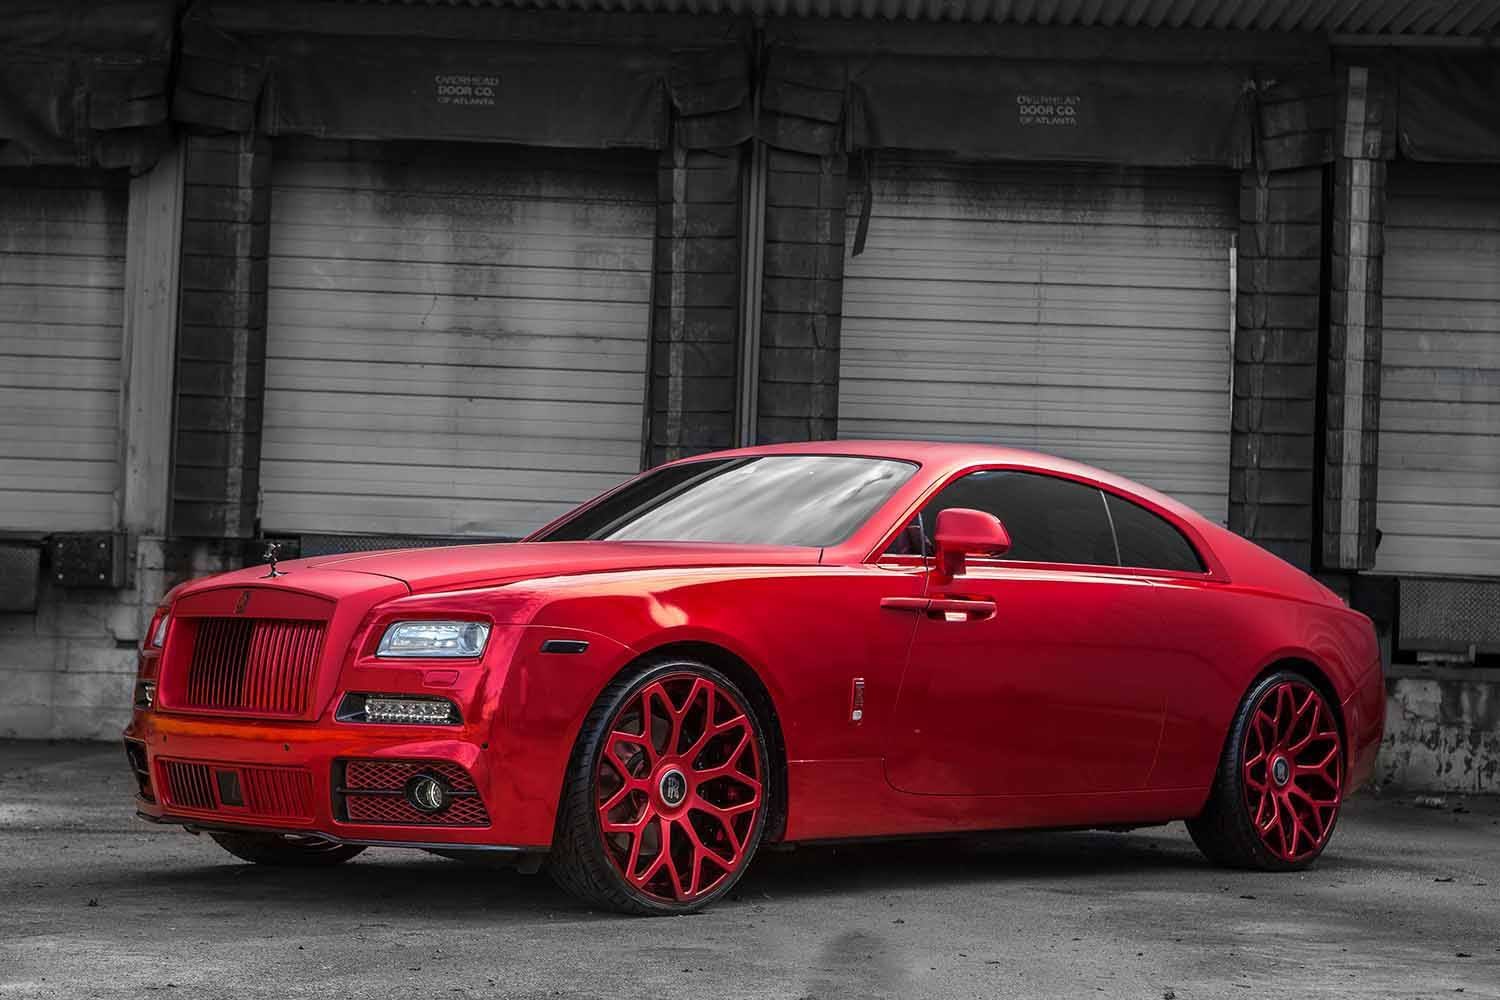 Red Rolls Royce Wraith with Custom Painted Grille - Photo by Forgiato